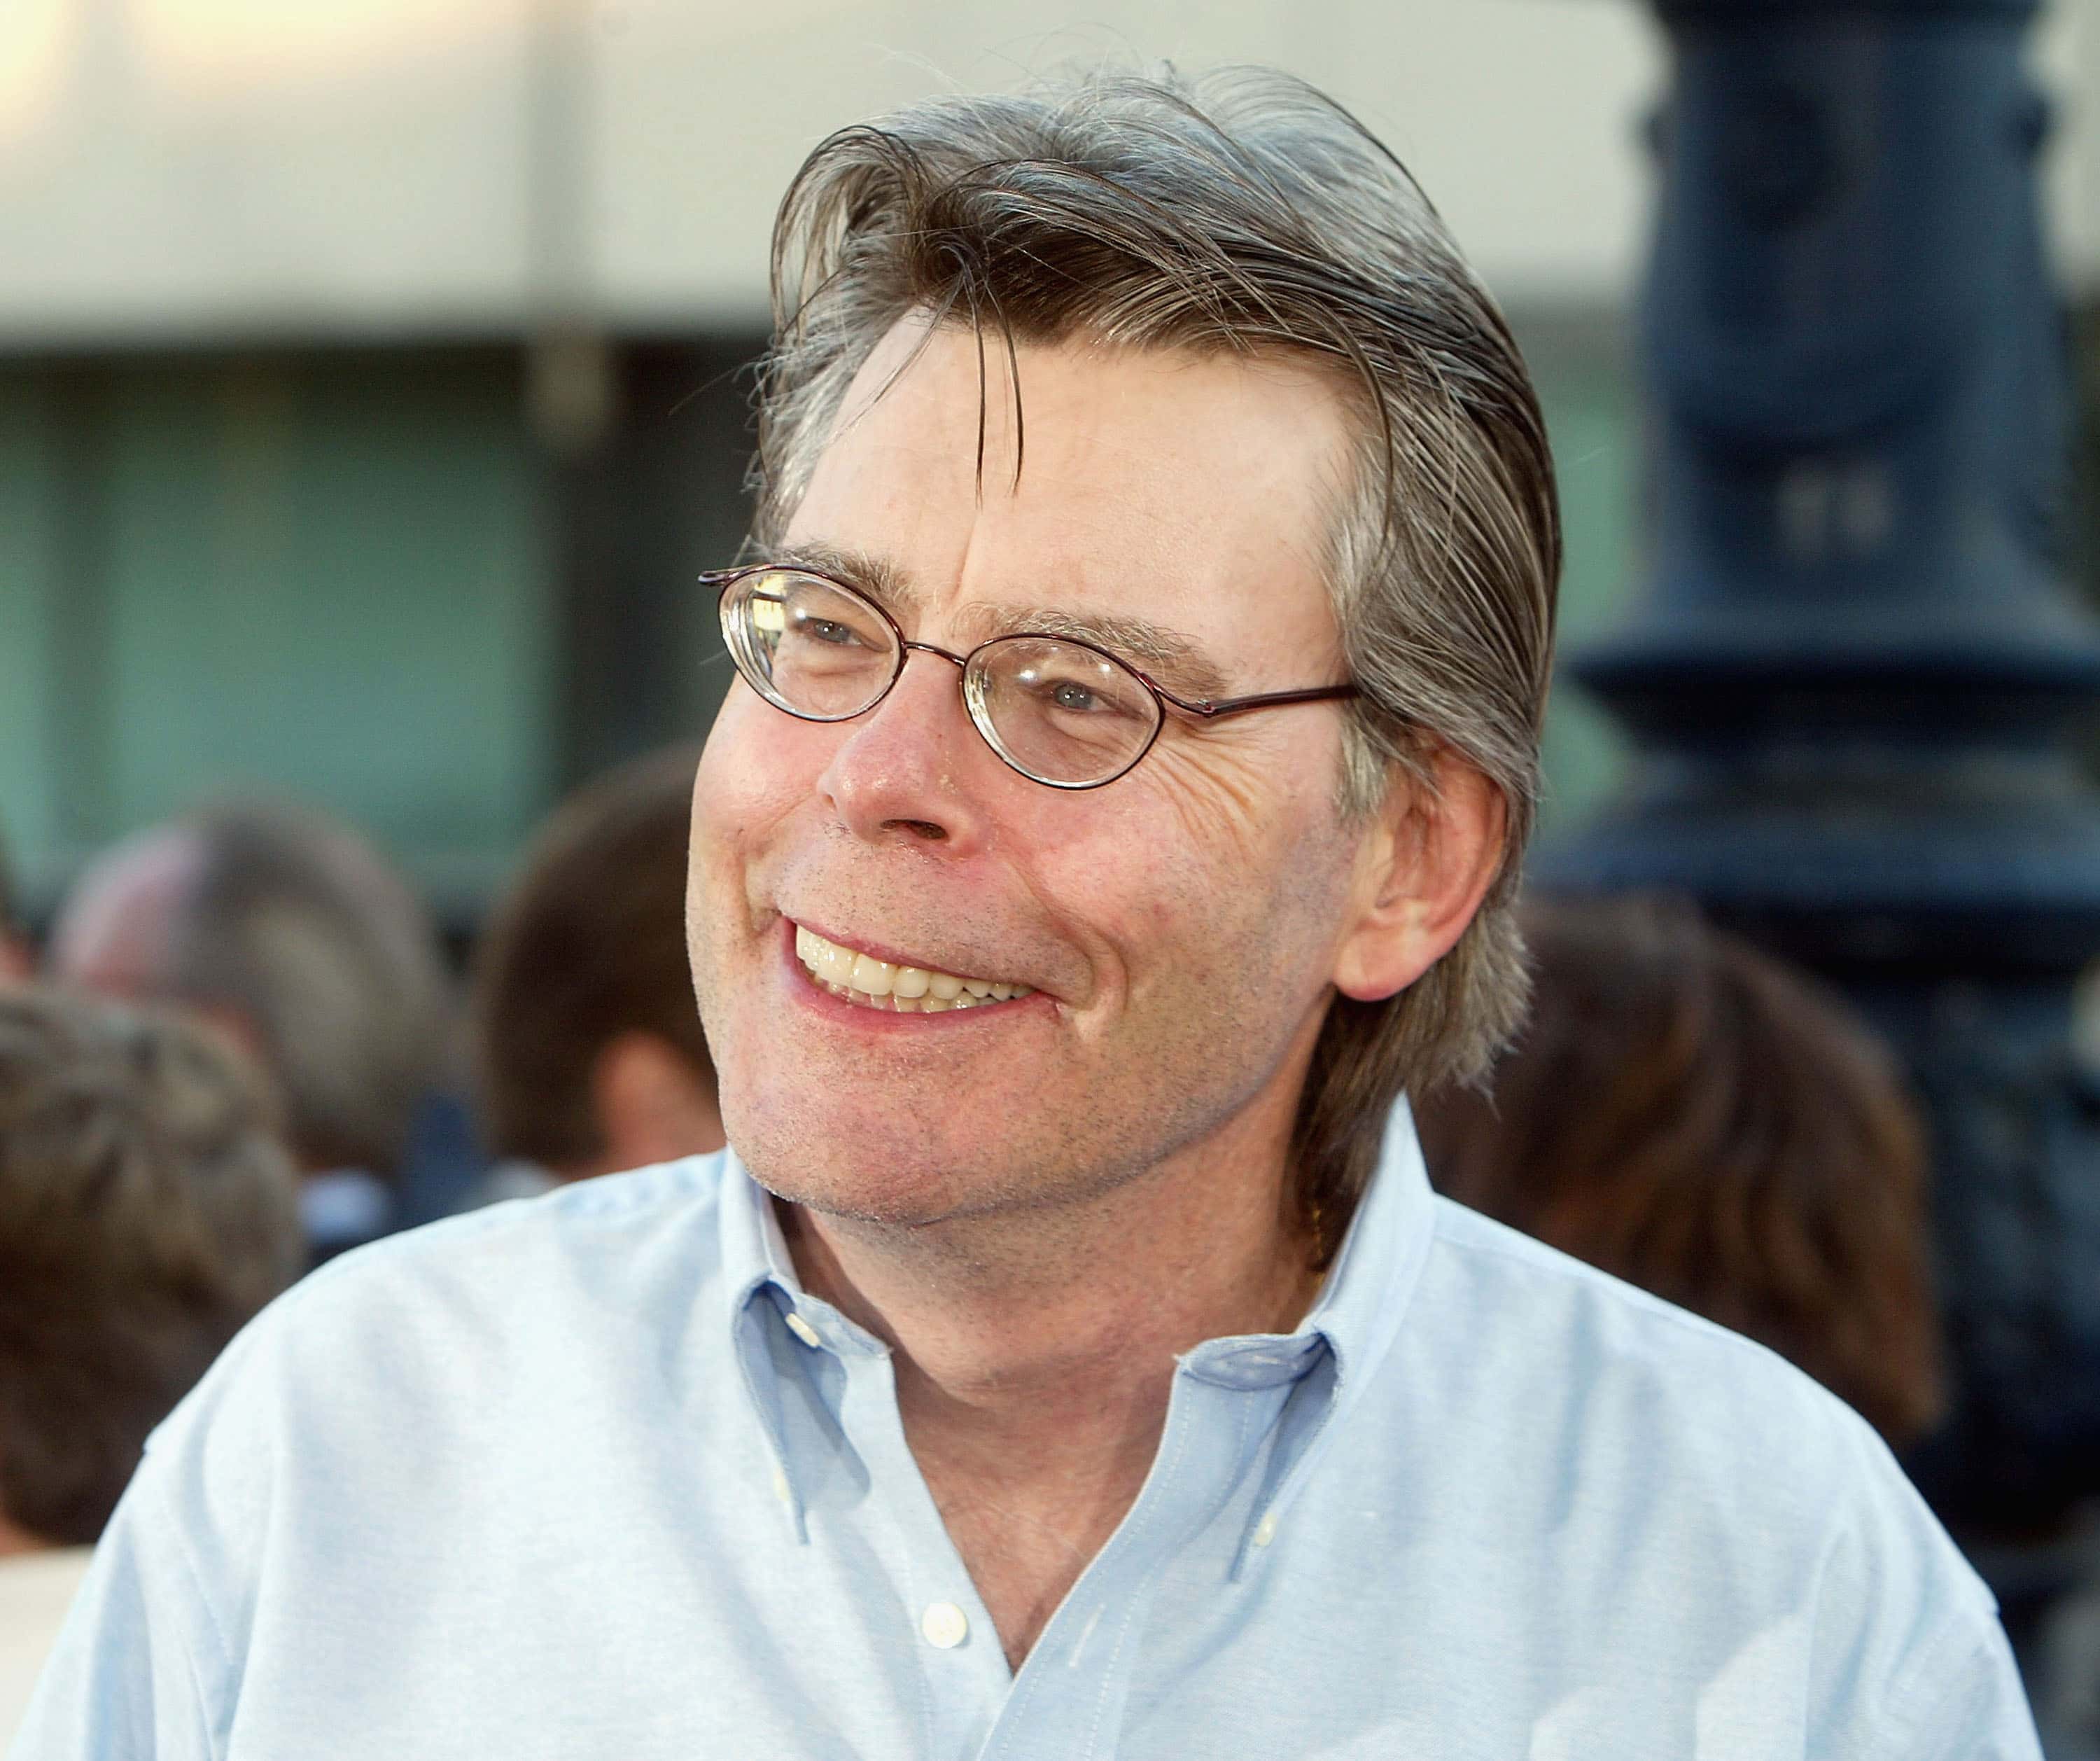 Chilling Facts About Stephen King, The Master Of Horror - Factinate